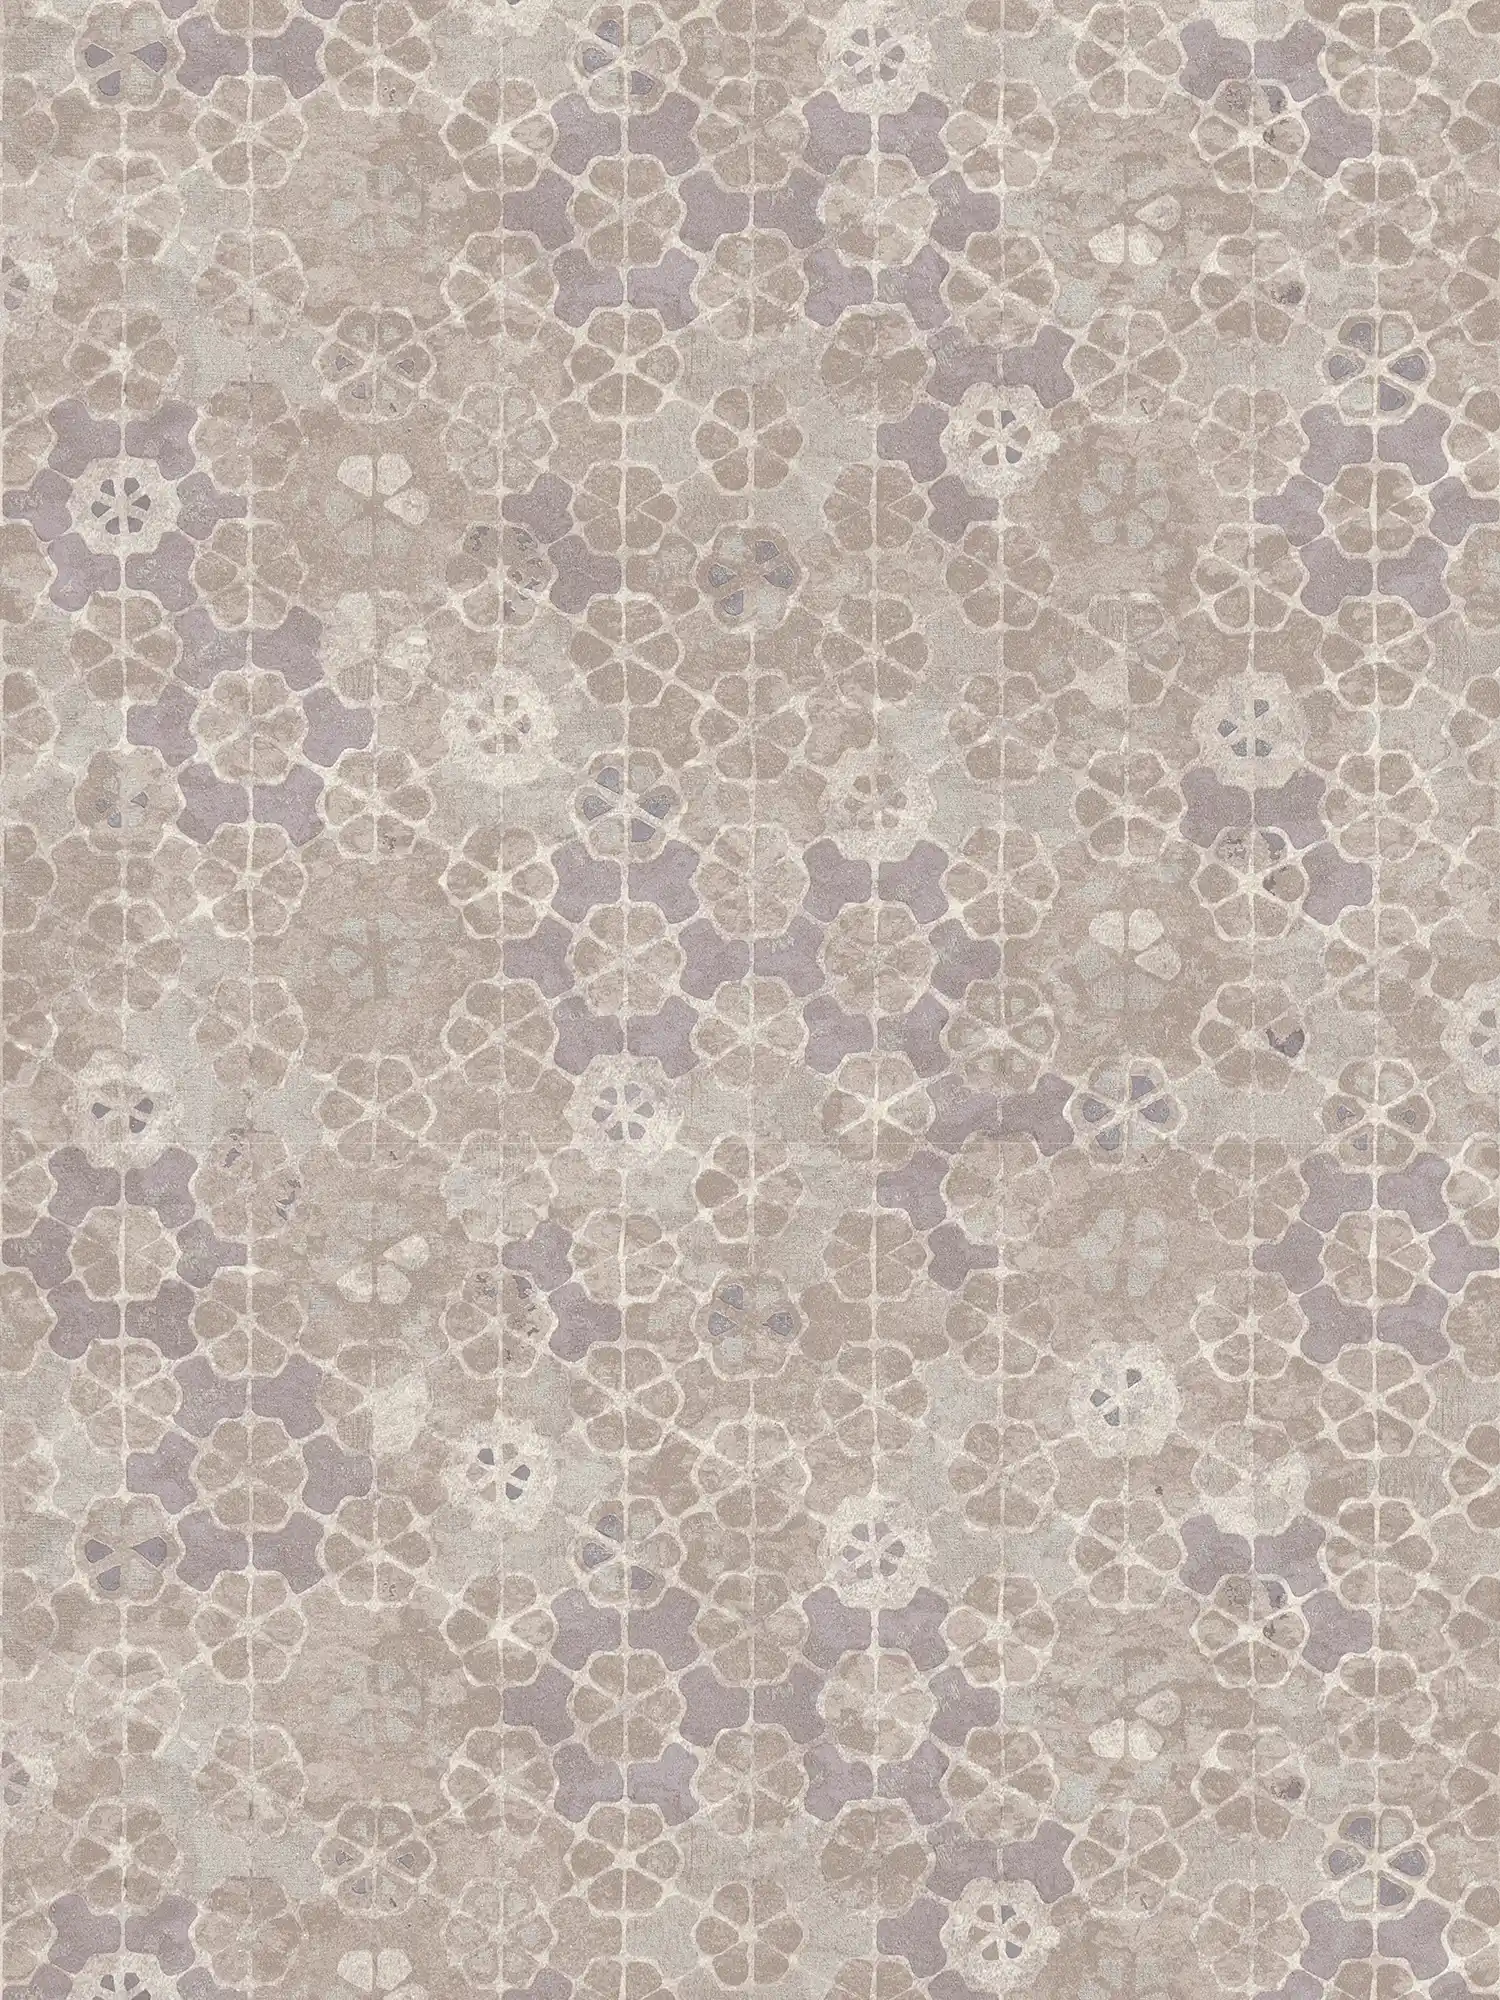 Non-woven wallpaper tile look with silver shimmer - grey, white
